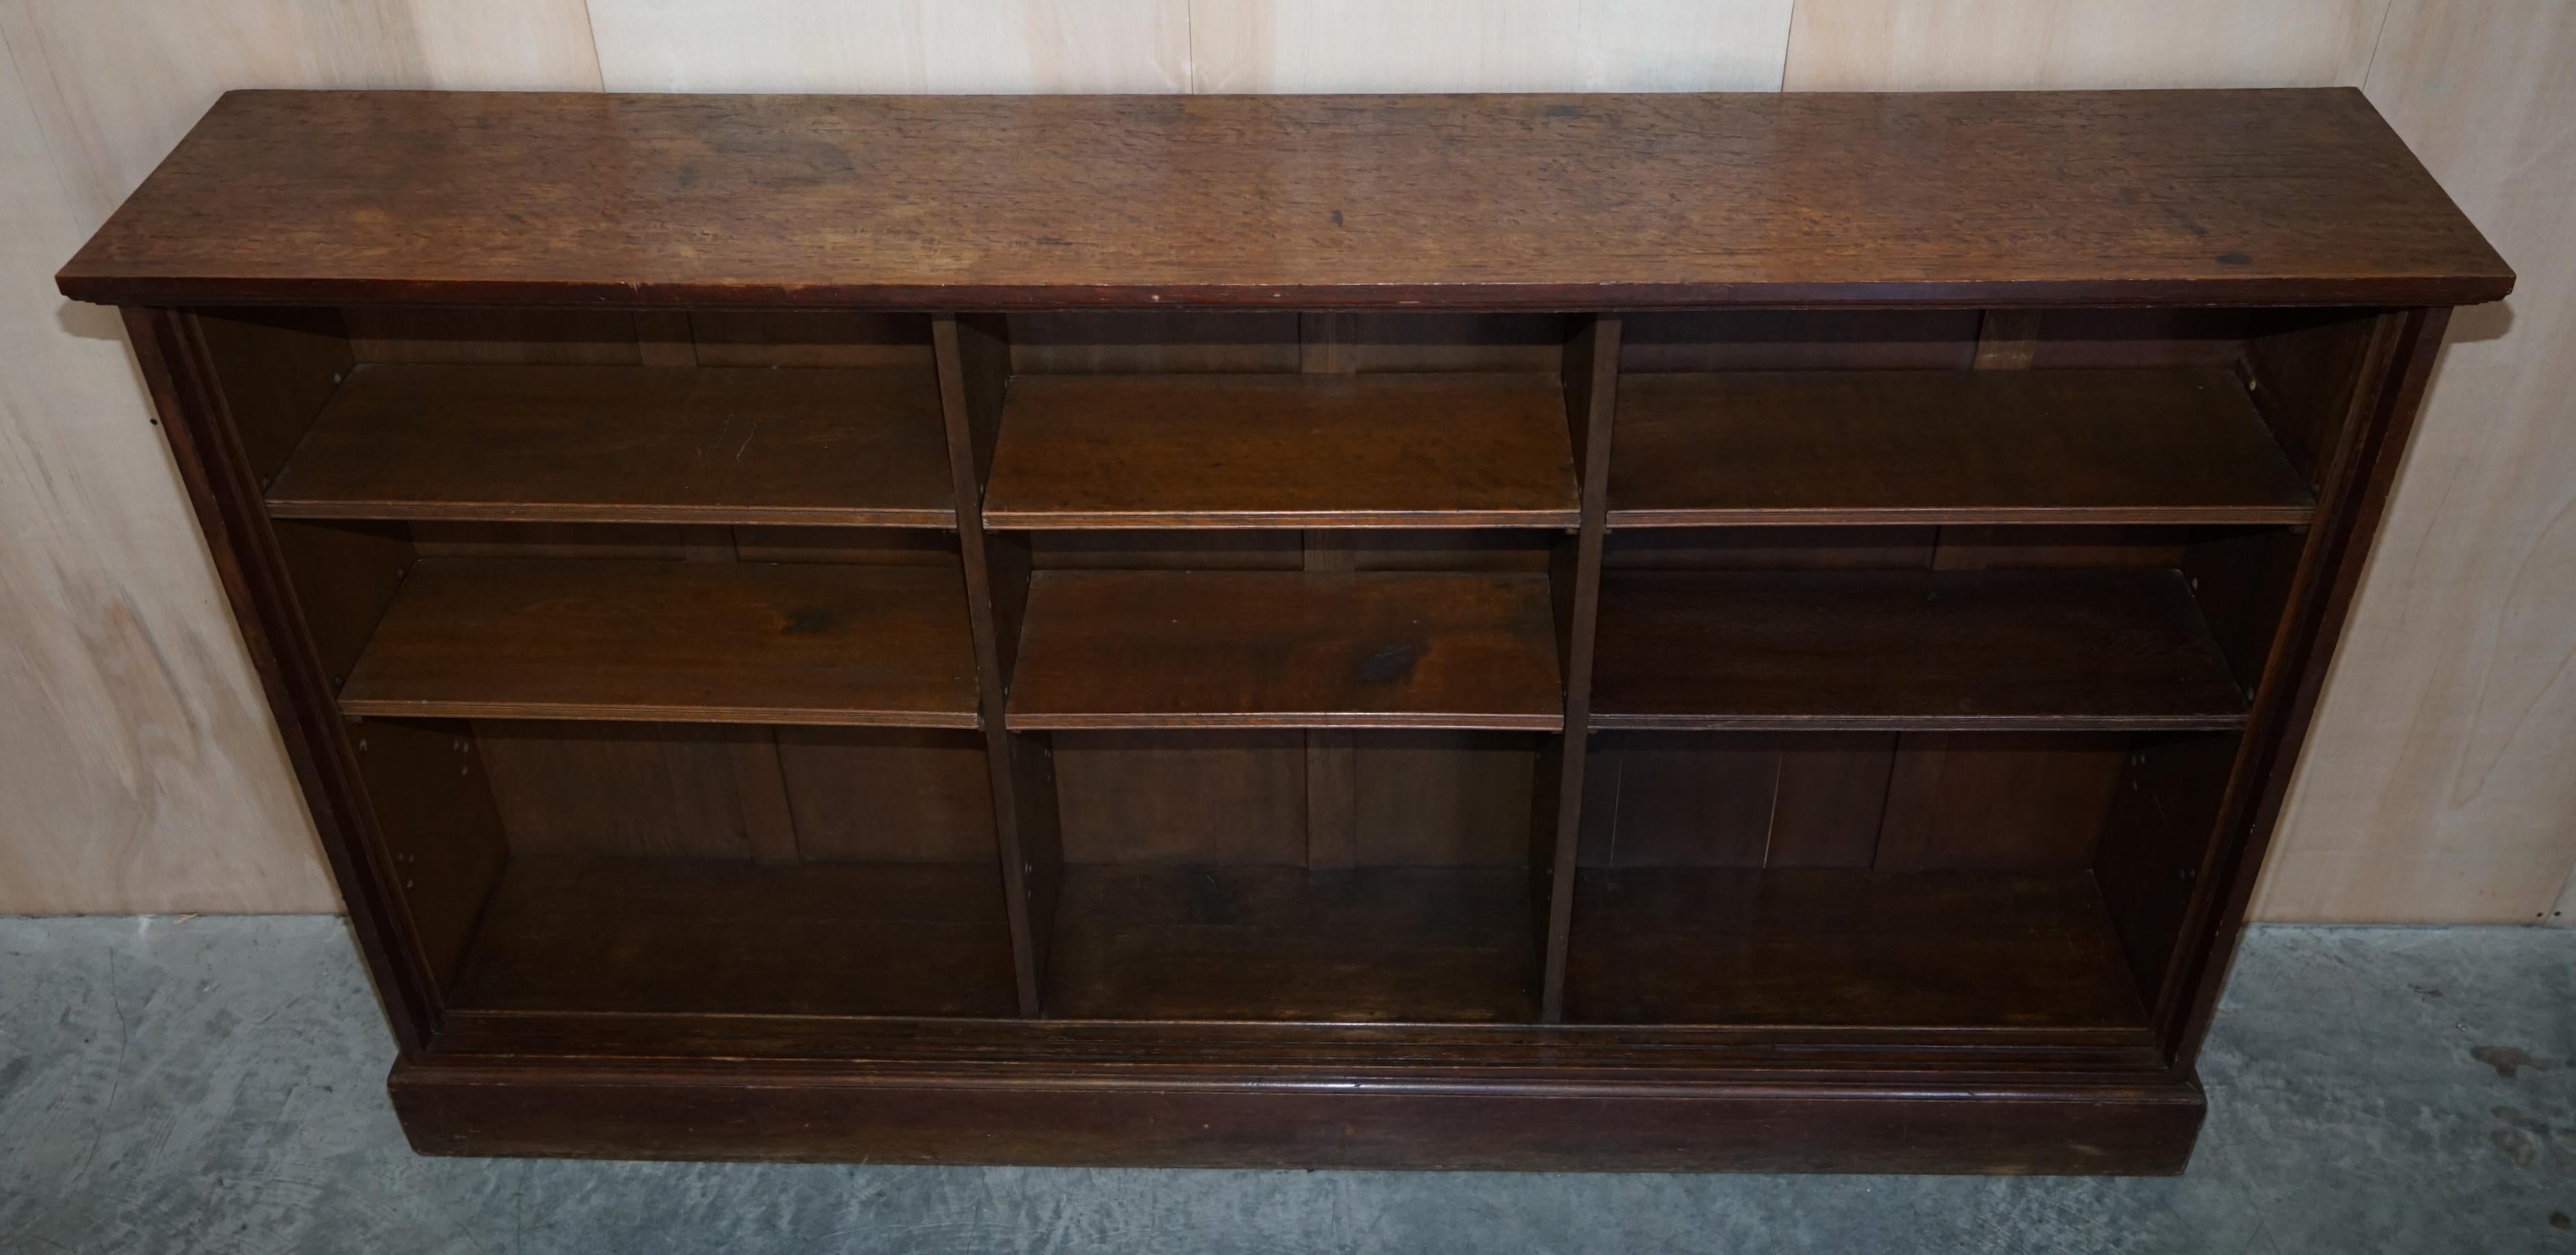 Late 19th Century 1 of 2 Victorian Period Dwarf Open Library Bookcases with Two Shelves Per Side For Sale